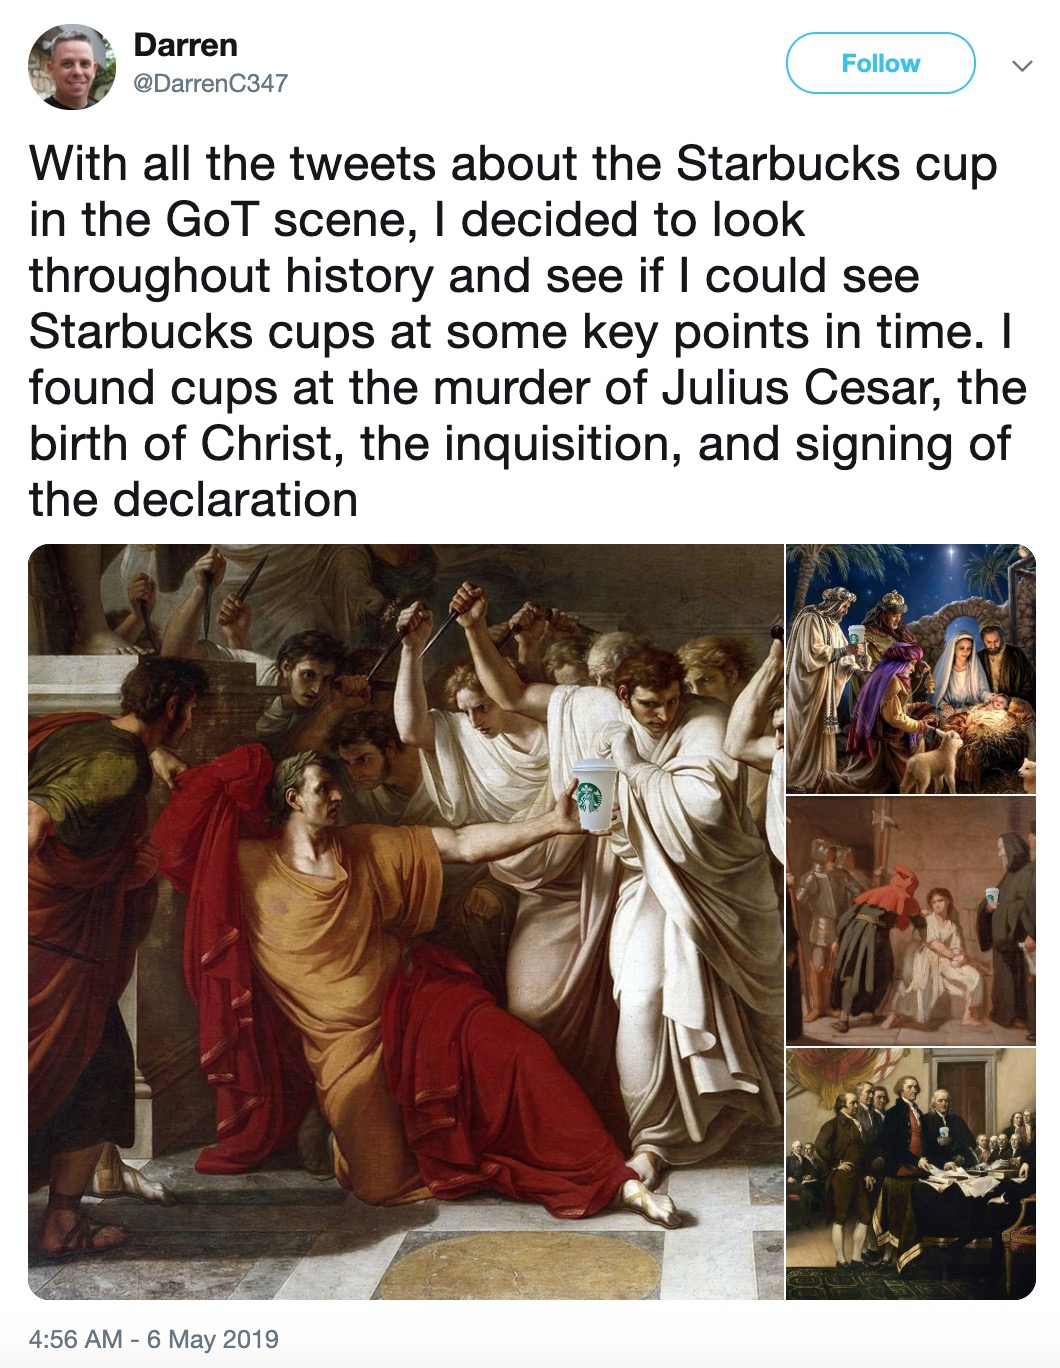 Game of Thrones Starbucks Cup - ides of march - Darren C347 v With all the tweets about the Starbucks cup in the GoT scene, I decided to look throughout history and see if I could see Starbucks cups at some key points in time. I found cups at the murder o